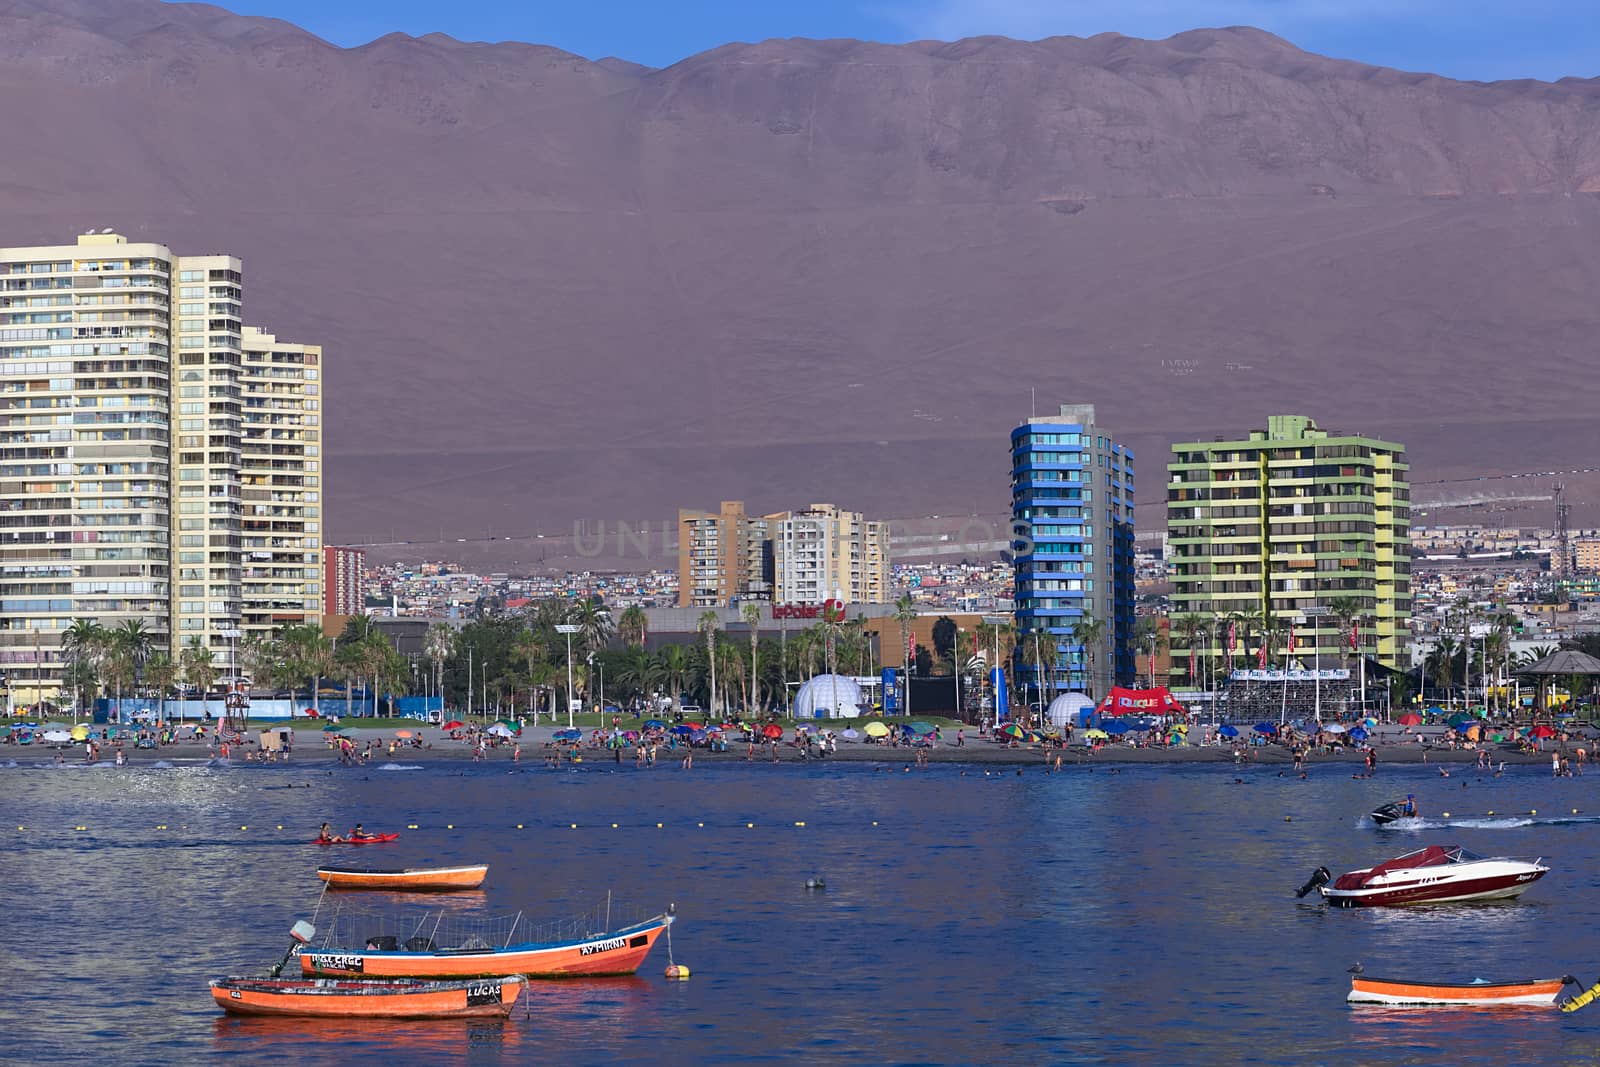 IQUIQUE, CHILE - JANUARY 23, 2015: View from the peninsula at the end of Cavancha beach over the fishing boats anchoring in the bay, Cavancha beach and Arturo Prat Chacon Avenue on January 23, 2015 in Iquique, Chile. Iquique is a popular beach town and free port city in Northern Chile. 